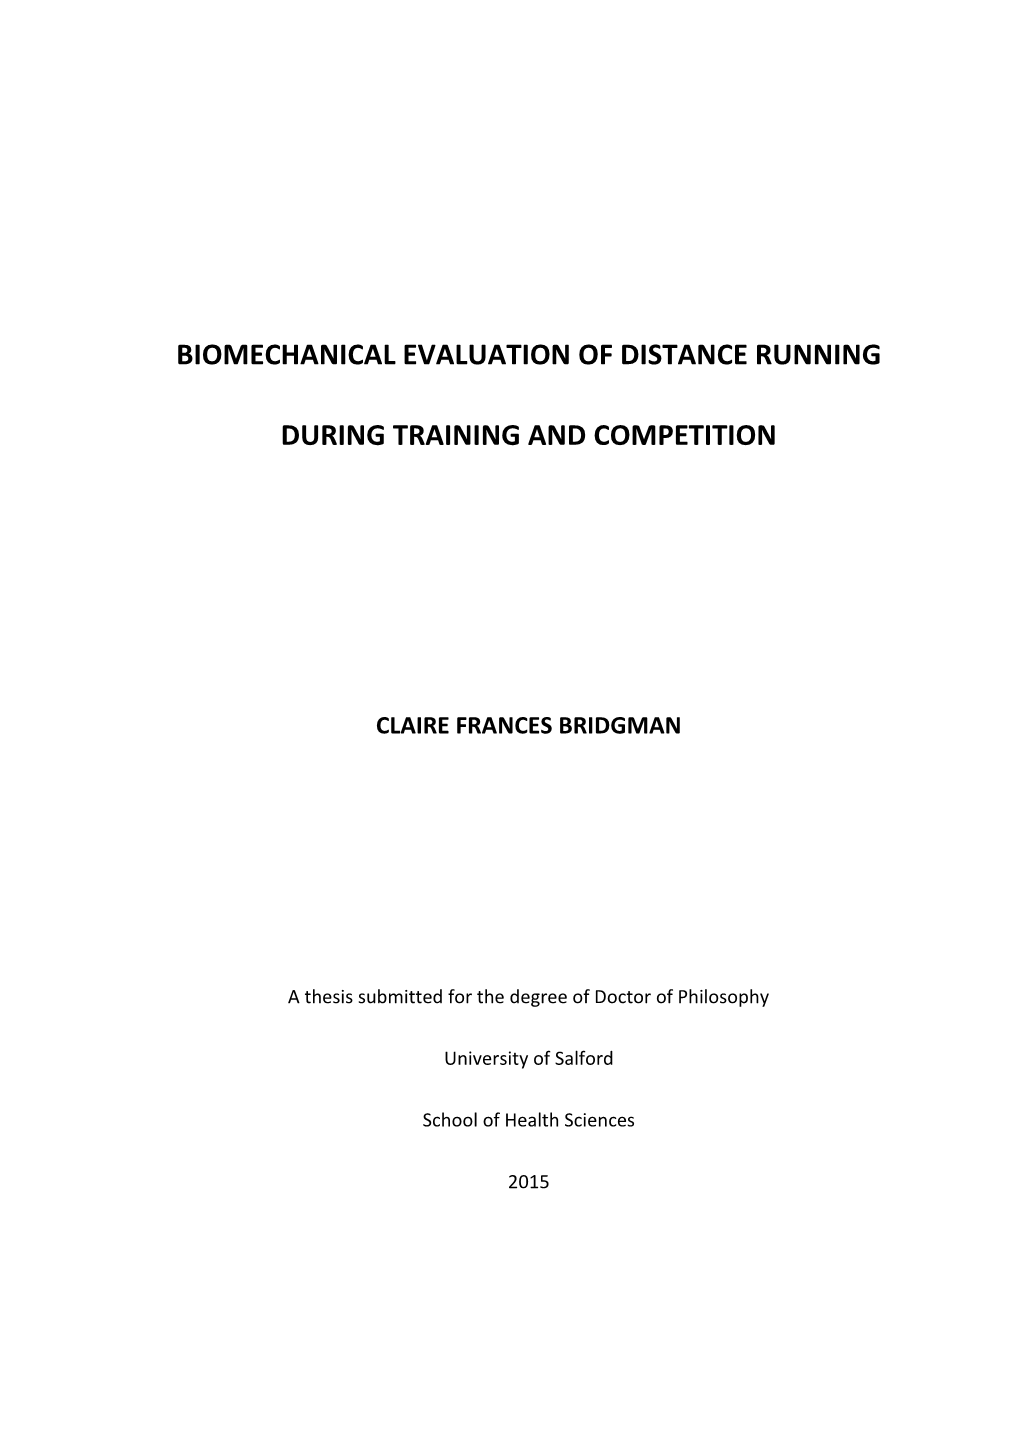 Biomechanical Evaluation of Distance Running During Training and Competition